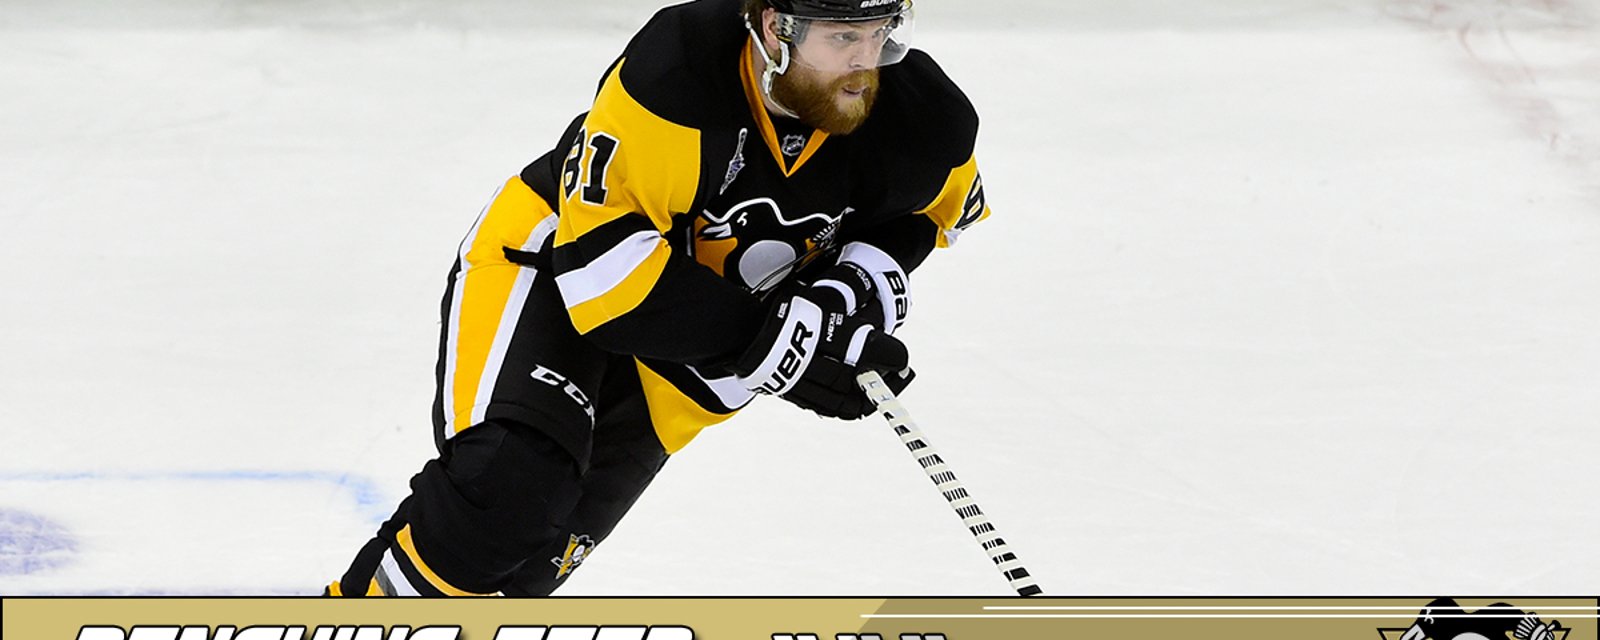 Phil Kessel could have the best offensive season of his career!